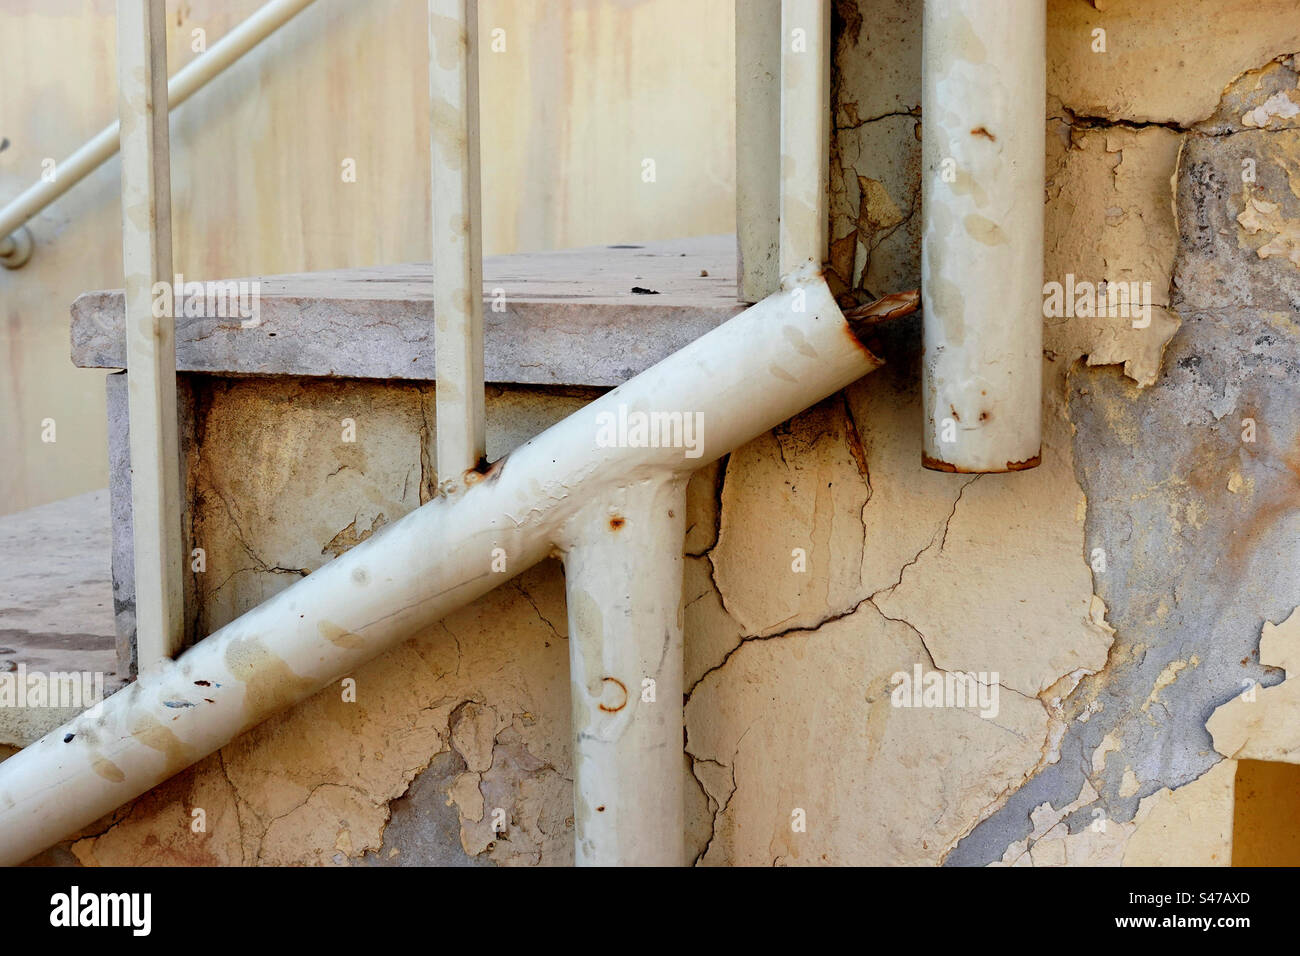 Yellow architectural details in bad condition Stock Photo